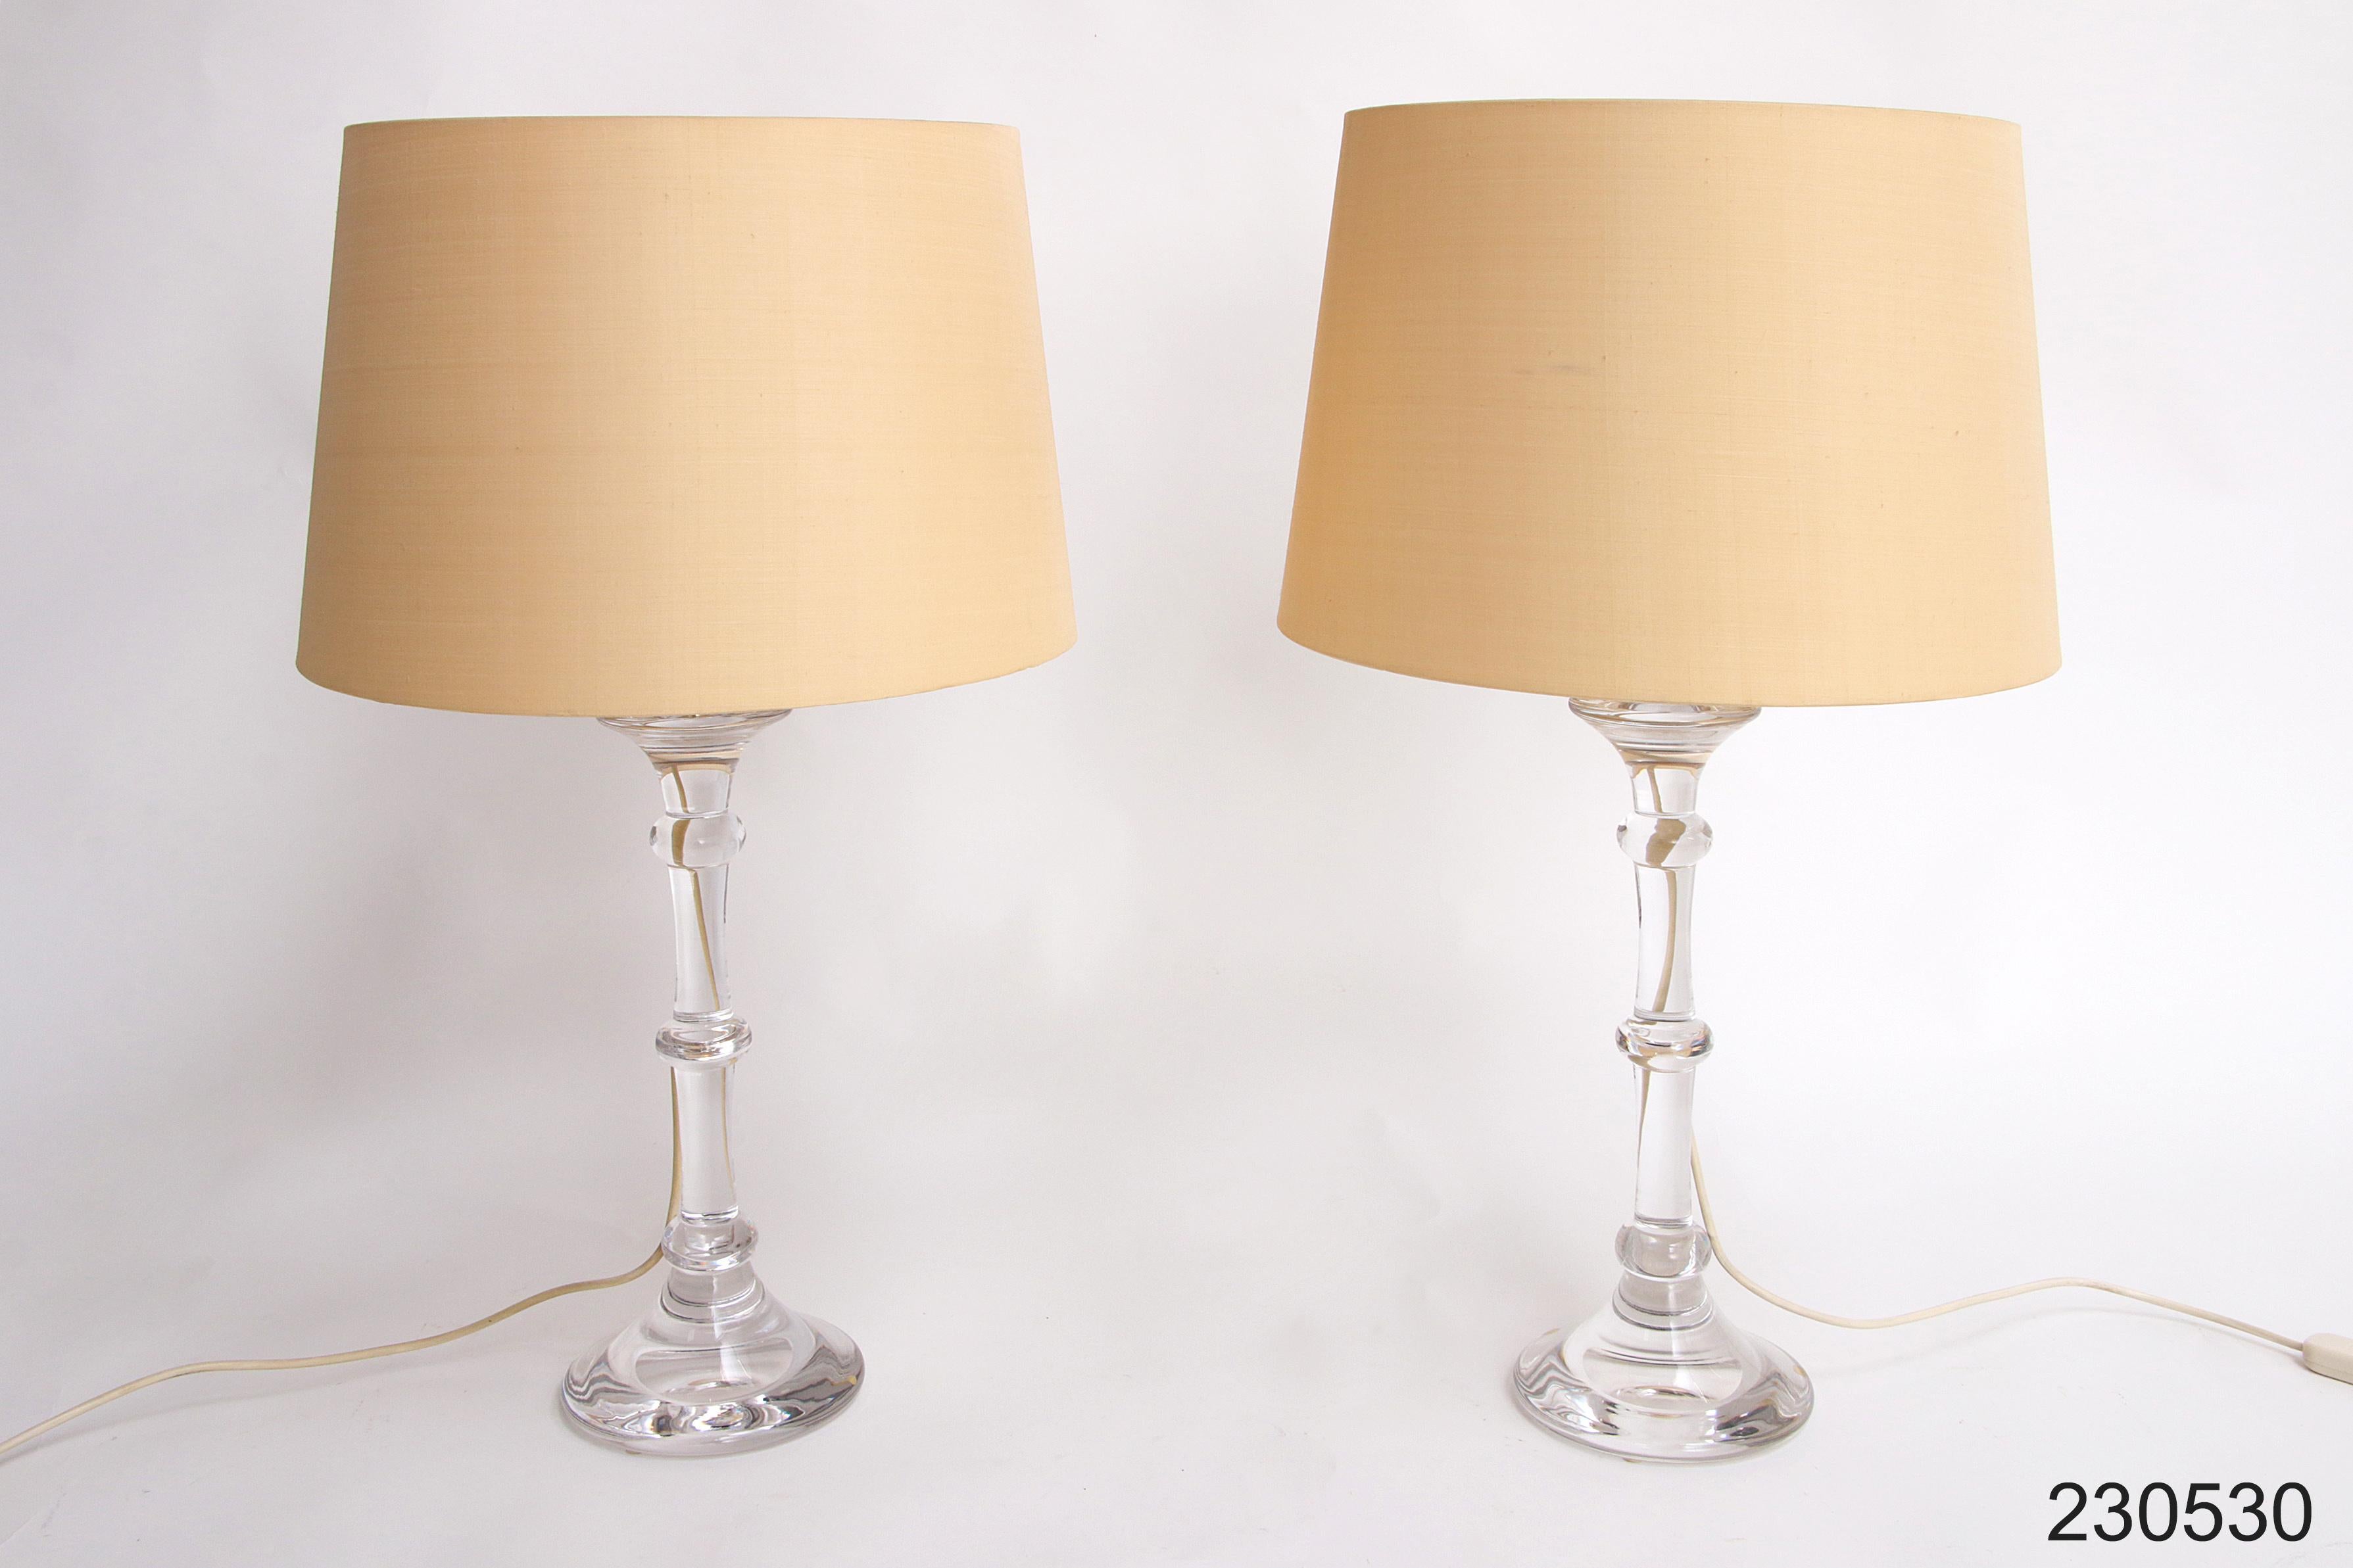 Ingo Maurer, Glass Table lampst with cream lampshades 1960 Mouth-blown For Sale 8